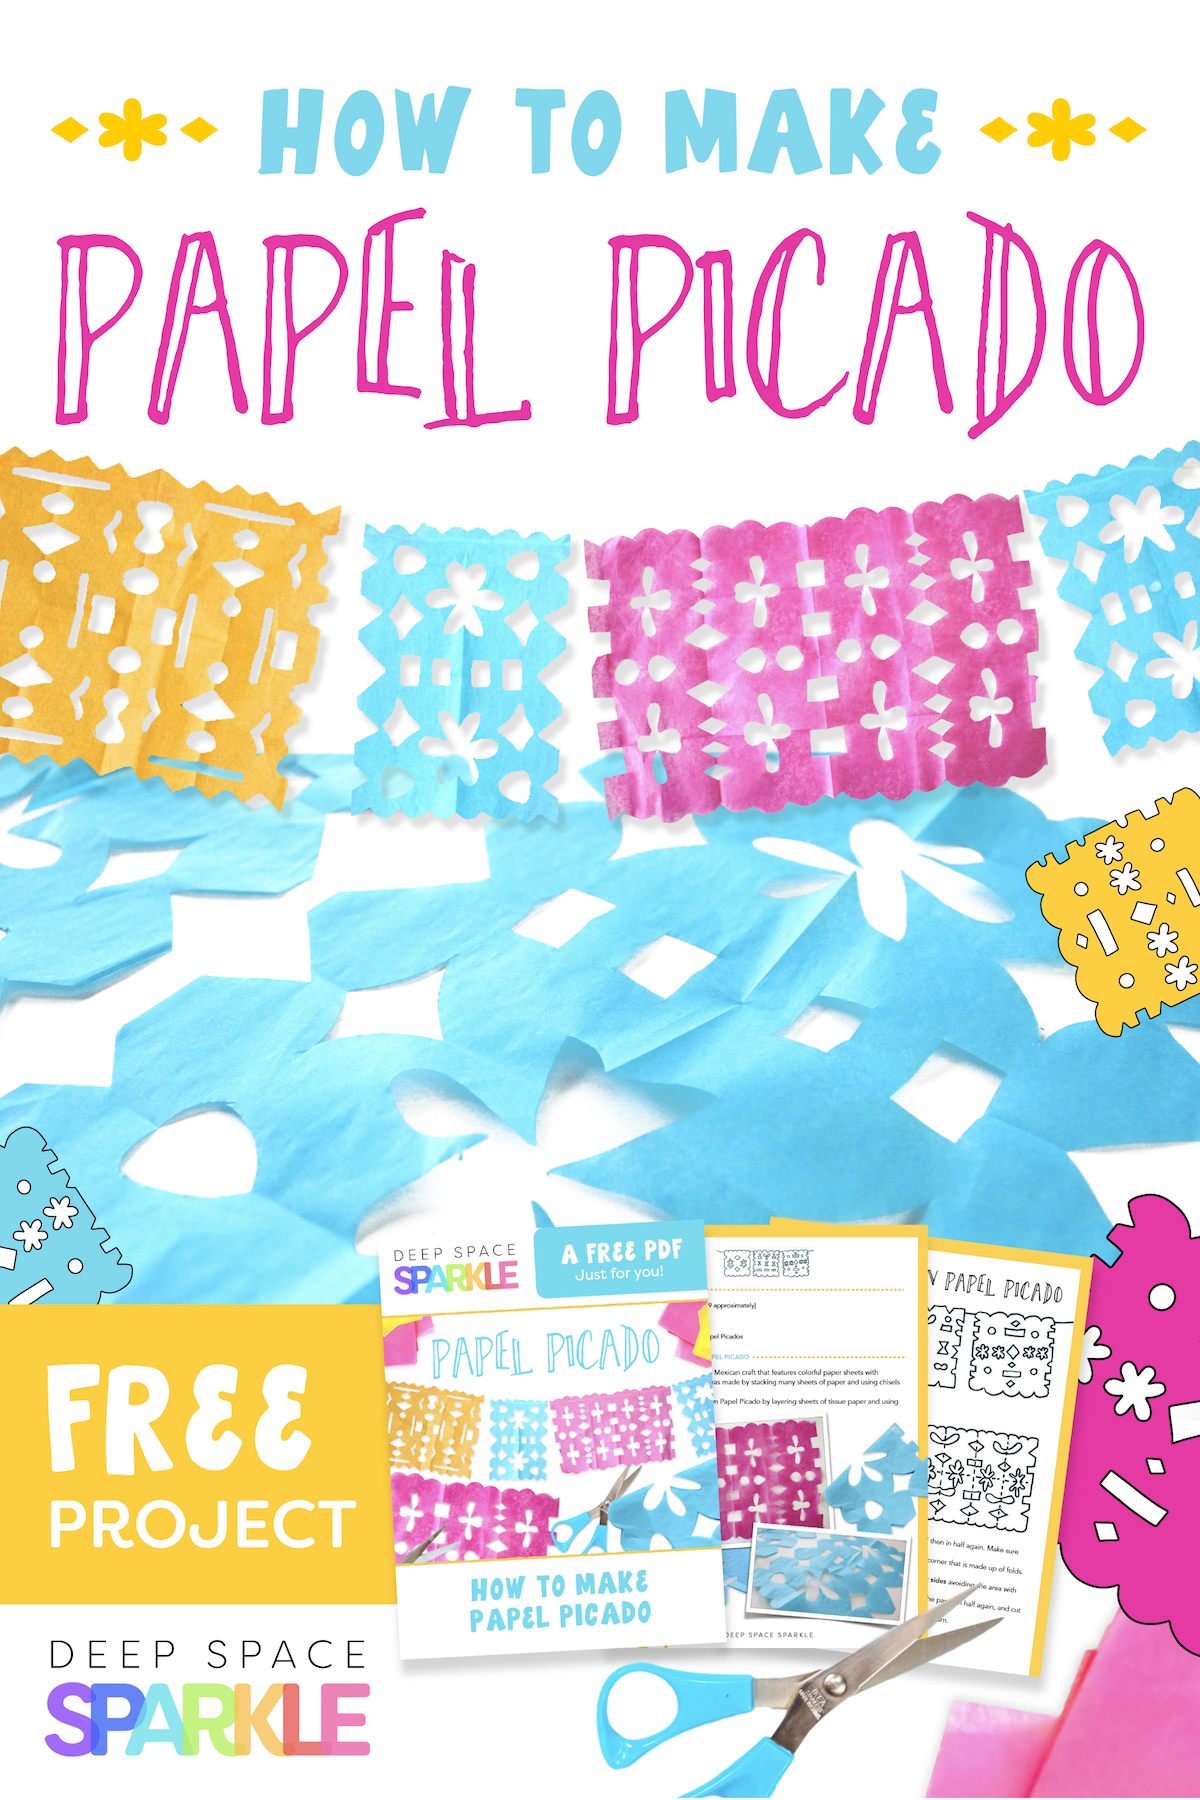 How to make papel picado deep space sparkle art projects for kids with how to steps and instructions